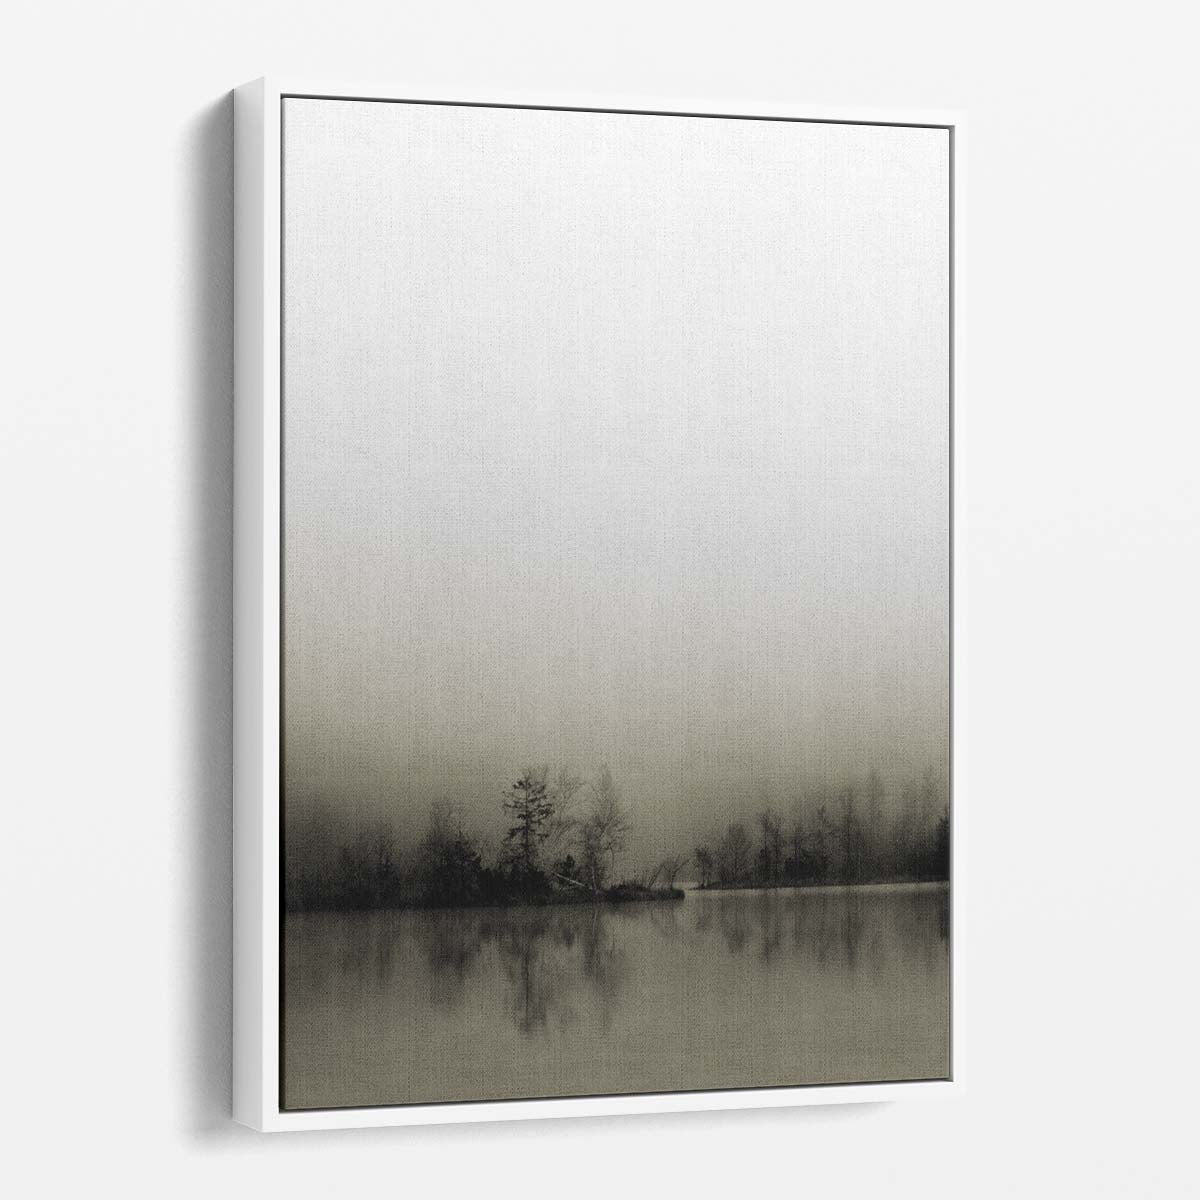 Misty Lake Serenity Sepia-Toned Autumn Photography by Henrik Spranz by Luxuriance Designs, made in USA